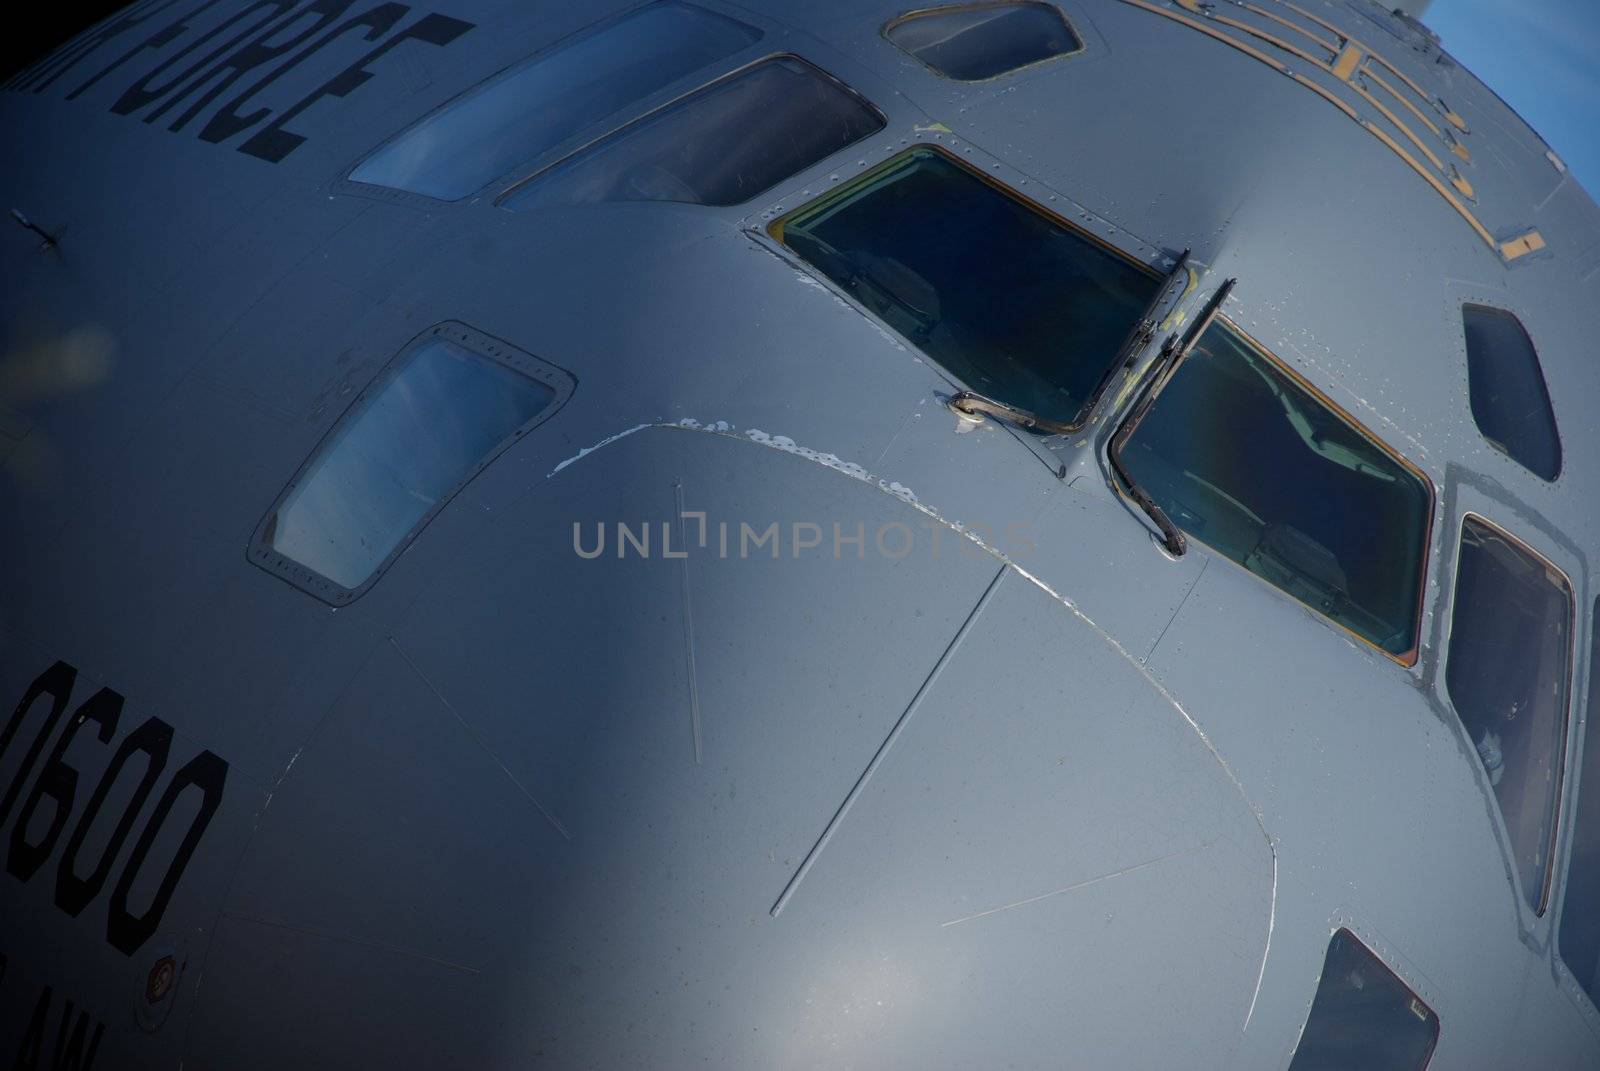 A close-up showing the nose of an Air Force cargo jet